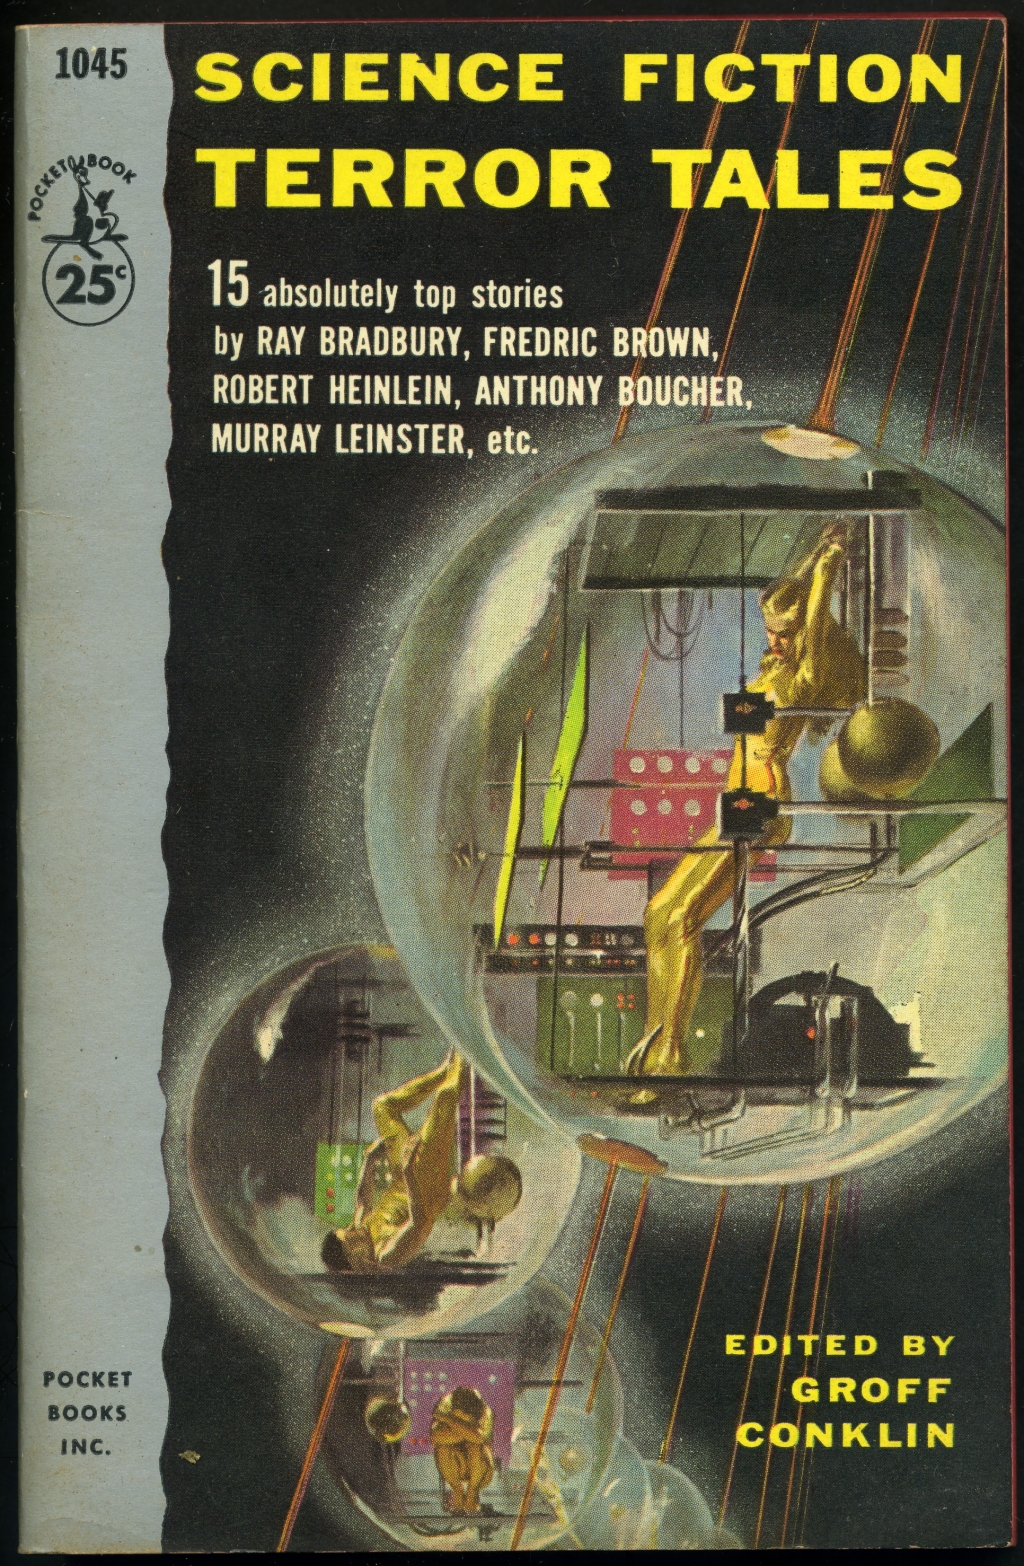 *Science Fiction Paperbacks* 1943 ~ 1959 Cover art by Ann | Null Entropy